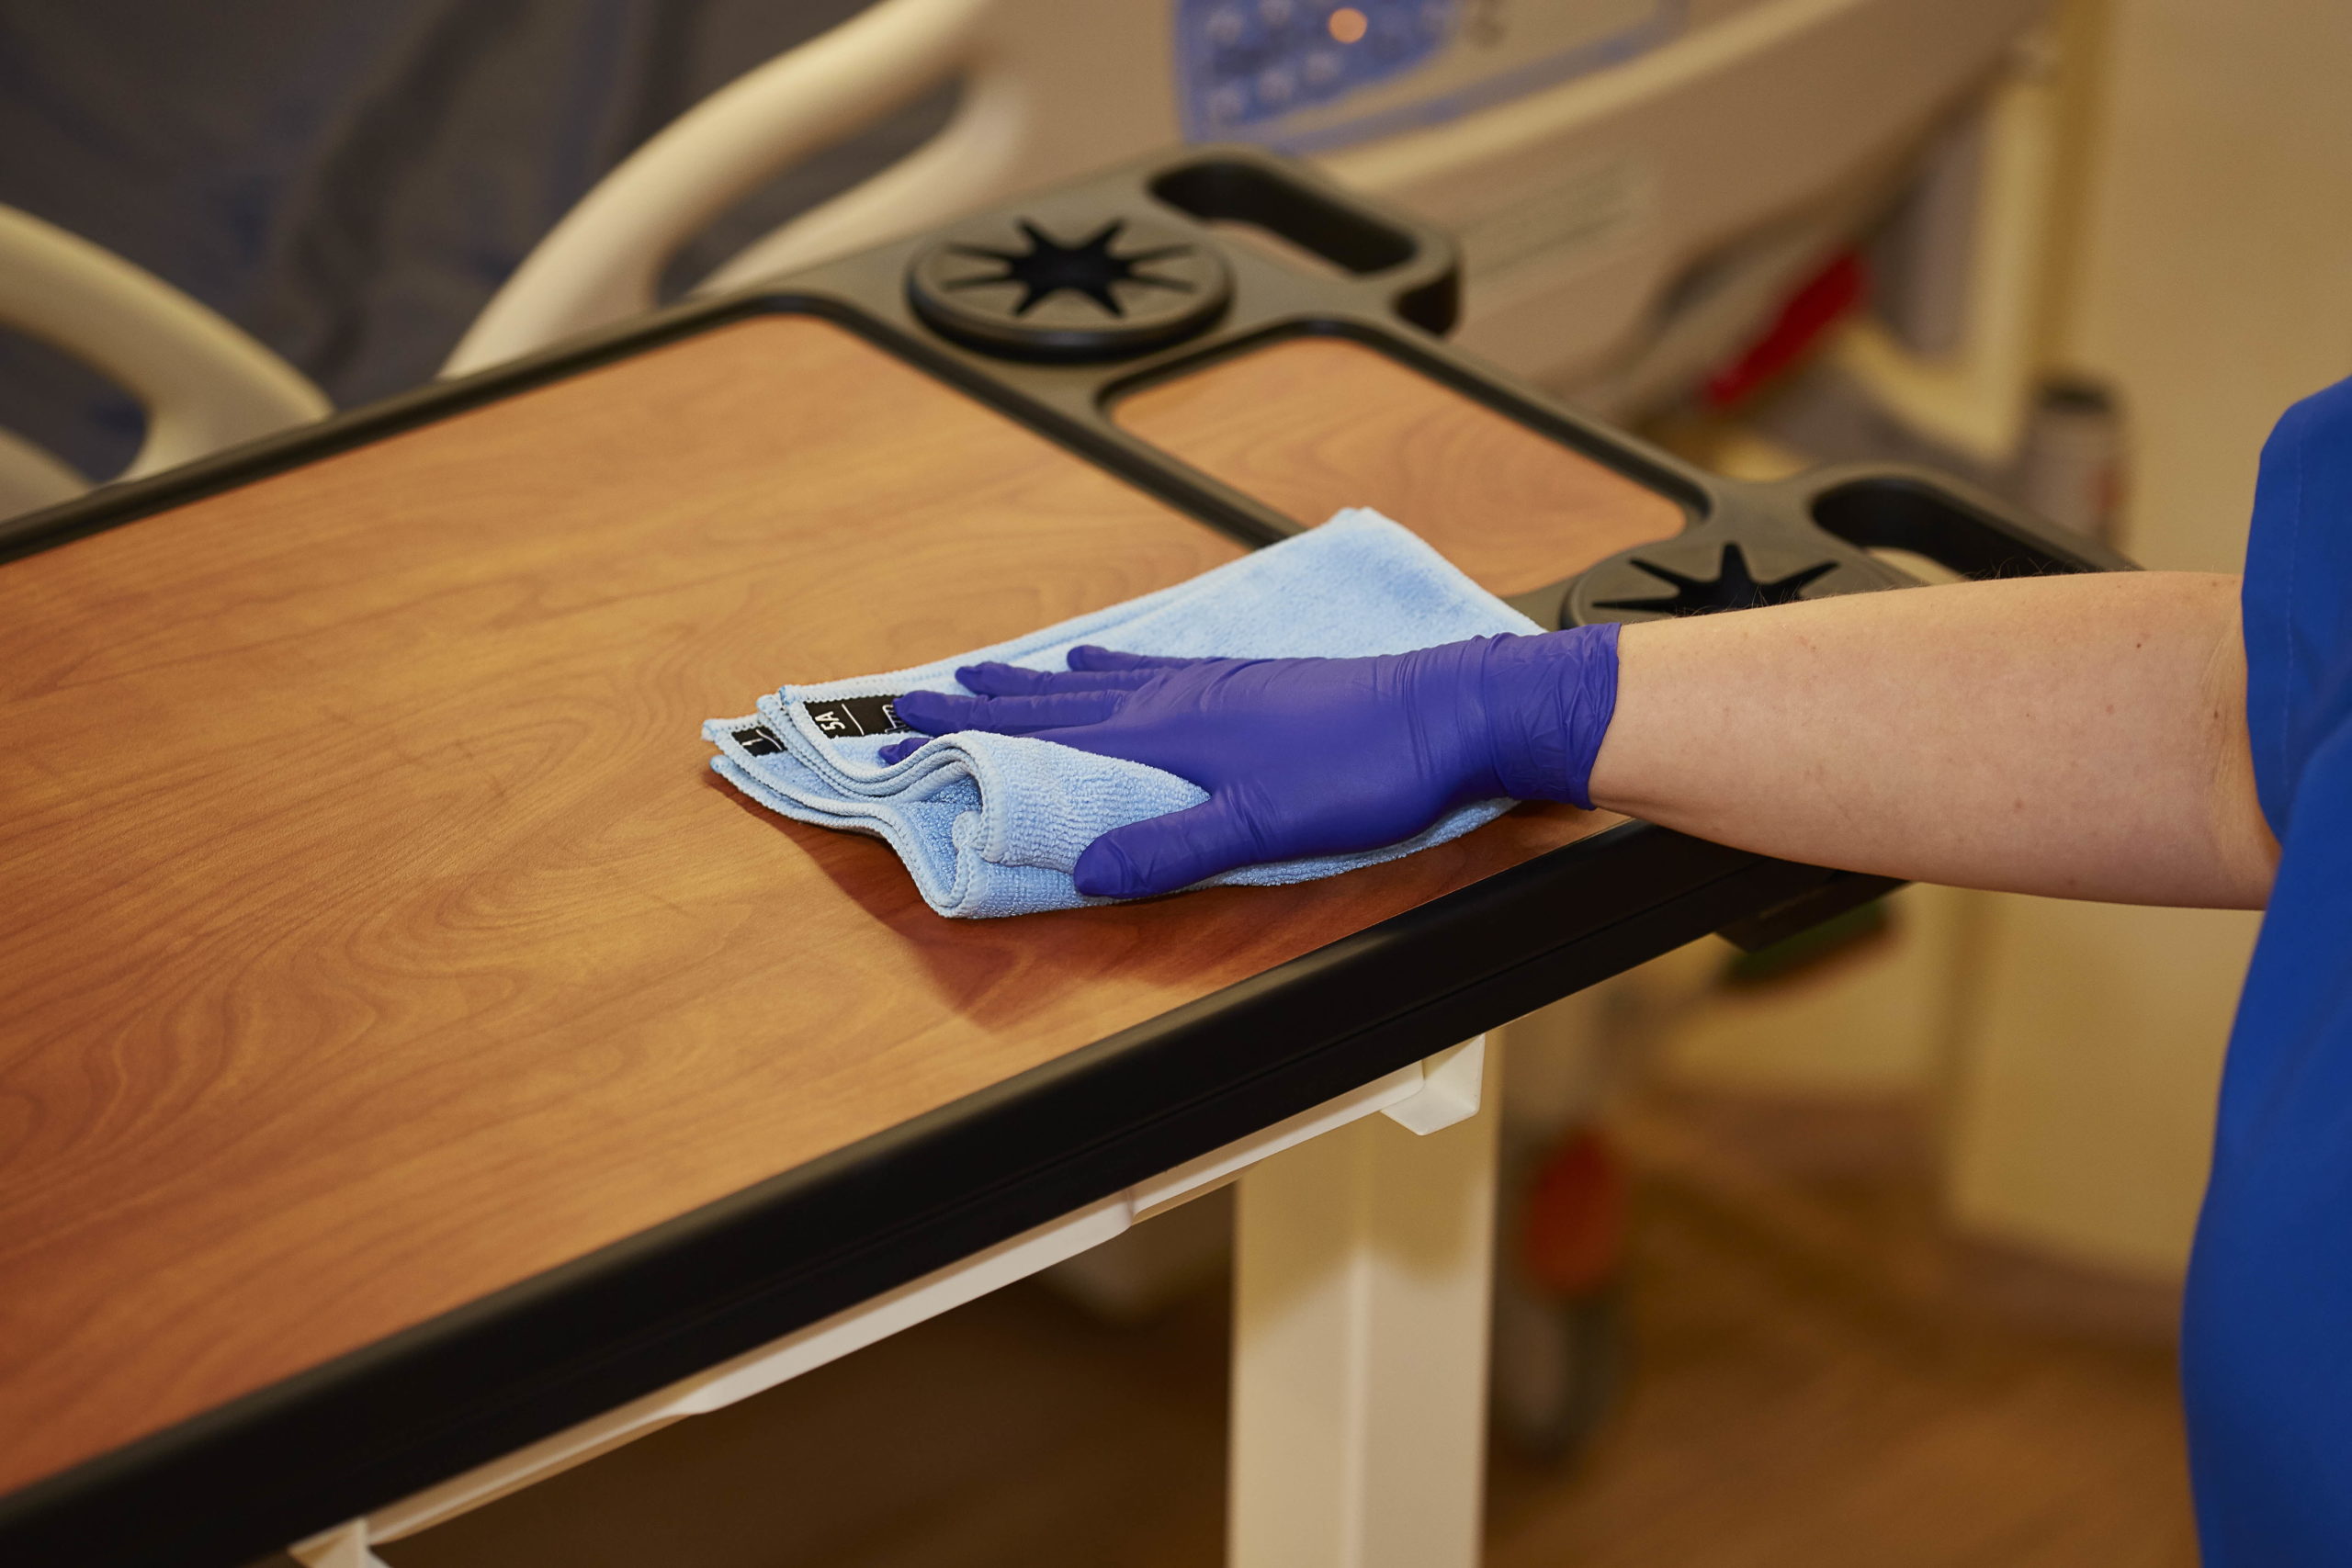 Environmental Cleaning for Infection Prevention